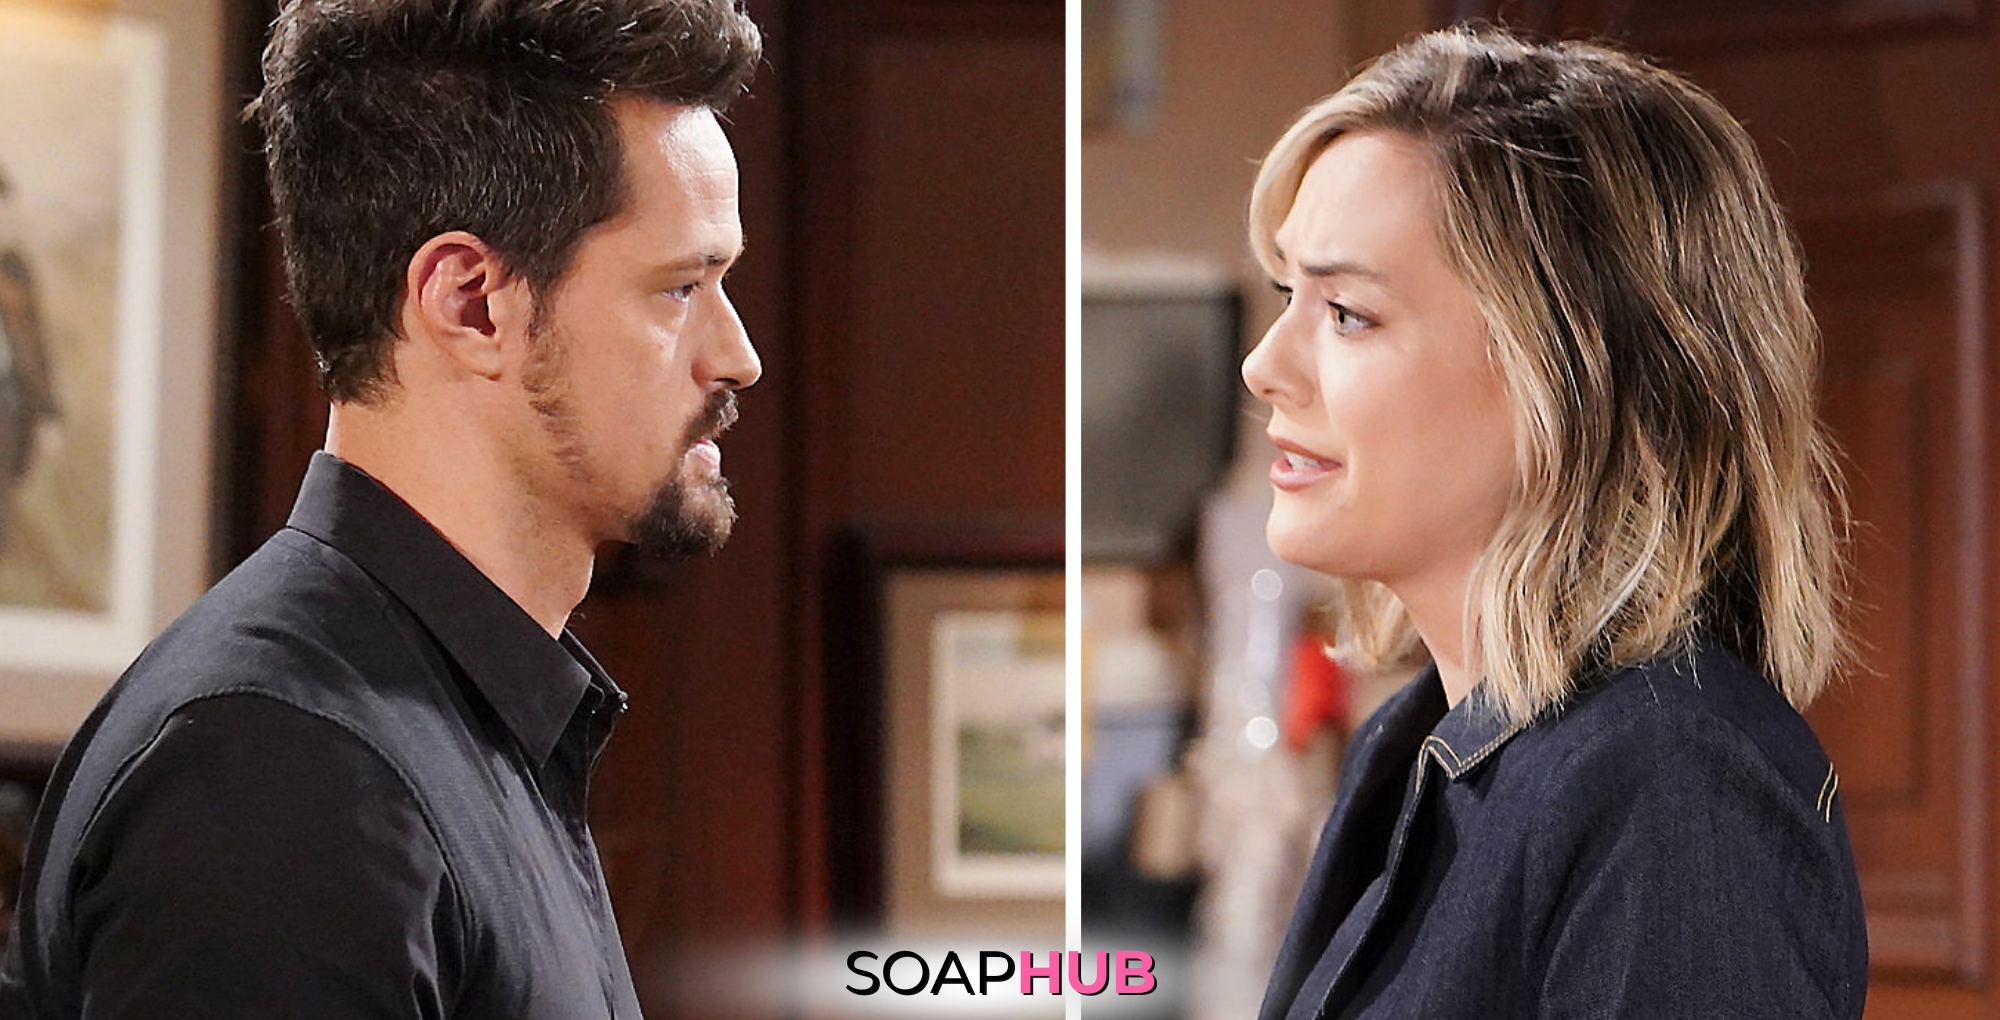 Bold and the Beautiful Spoilers for Monday, March 18 Episode 9232 Feature Thomas and Hope.